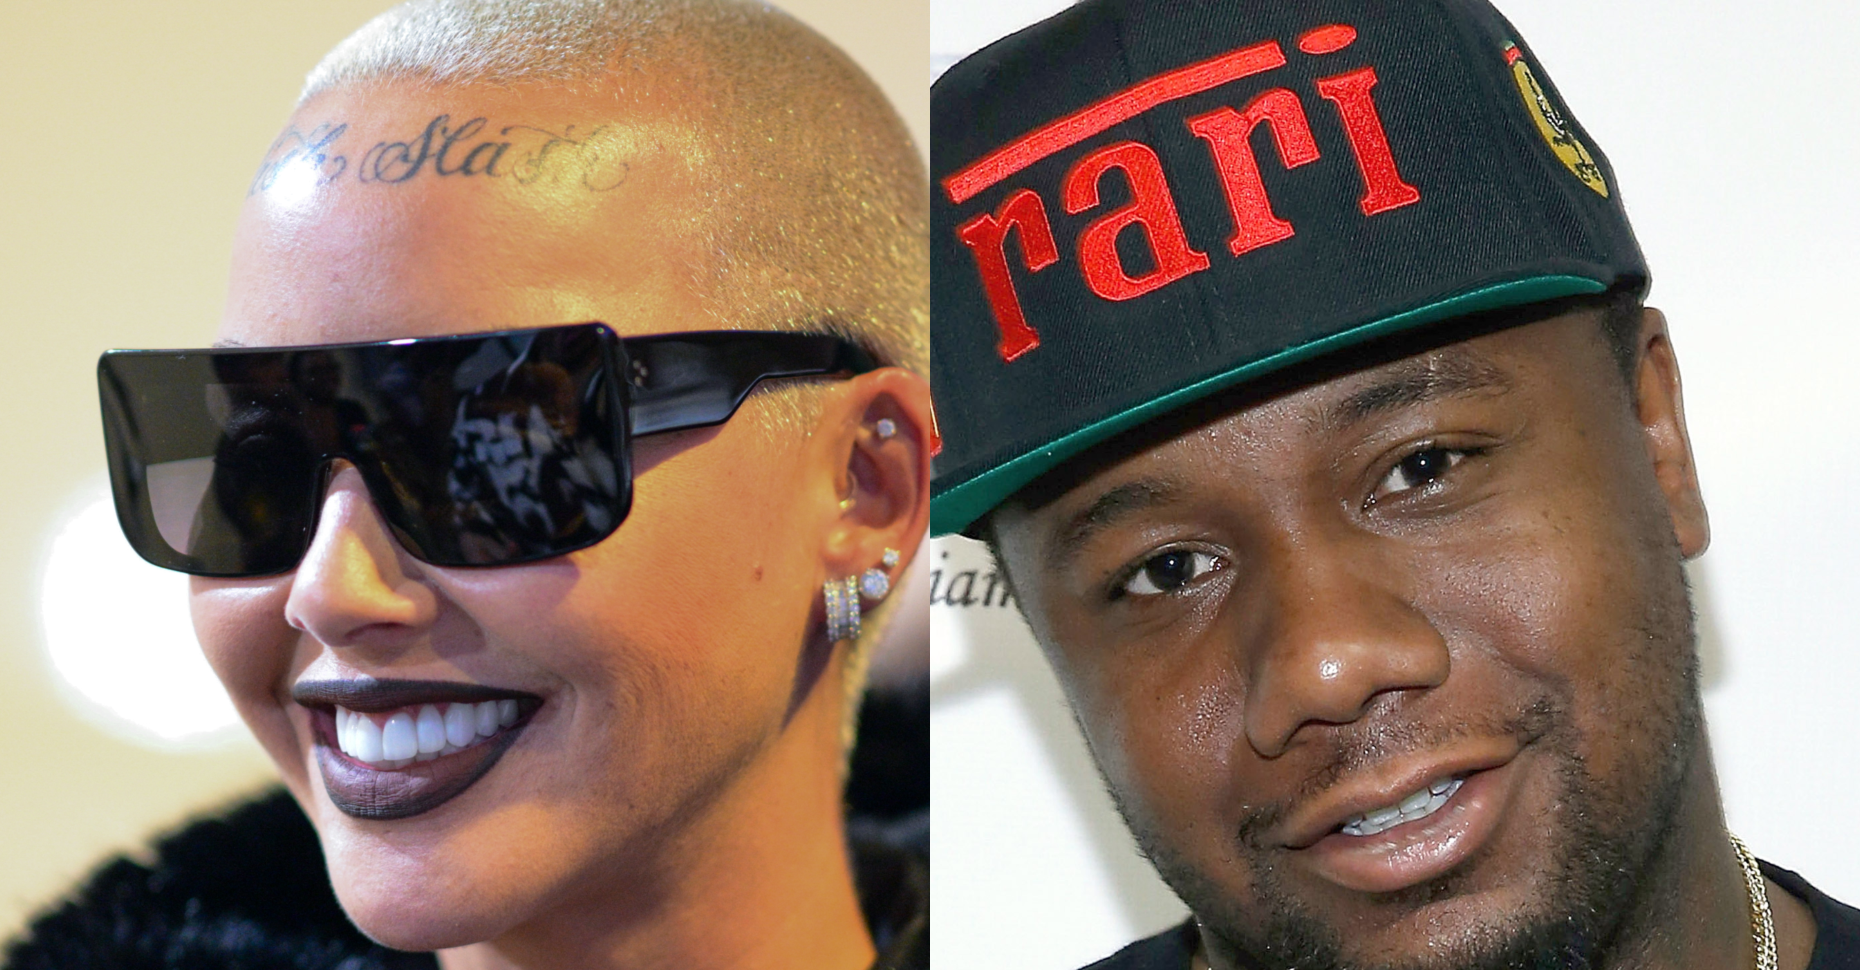 Amber Rose Checks Murda Mook For Comments Criticizing Women With “No Talent”